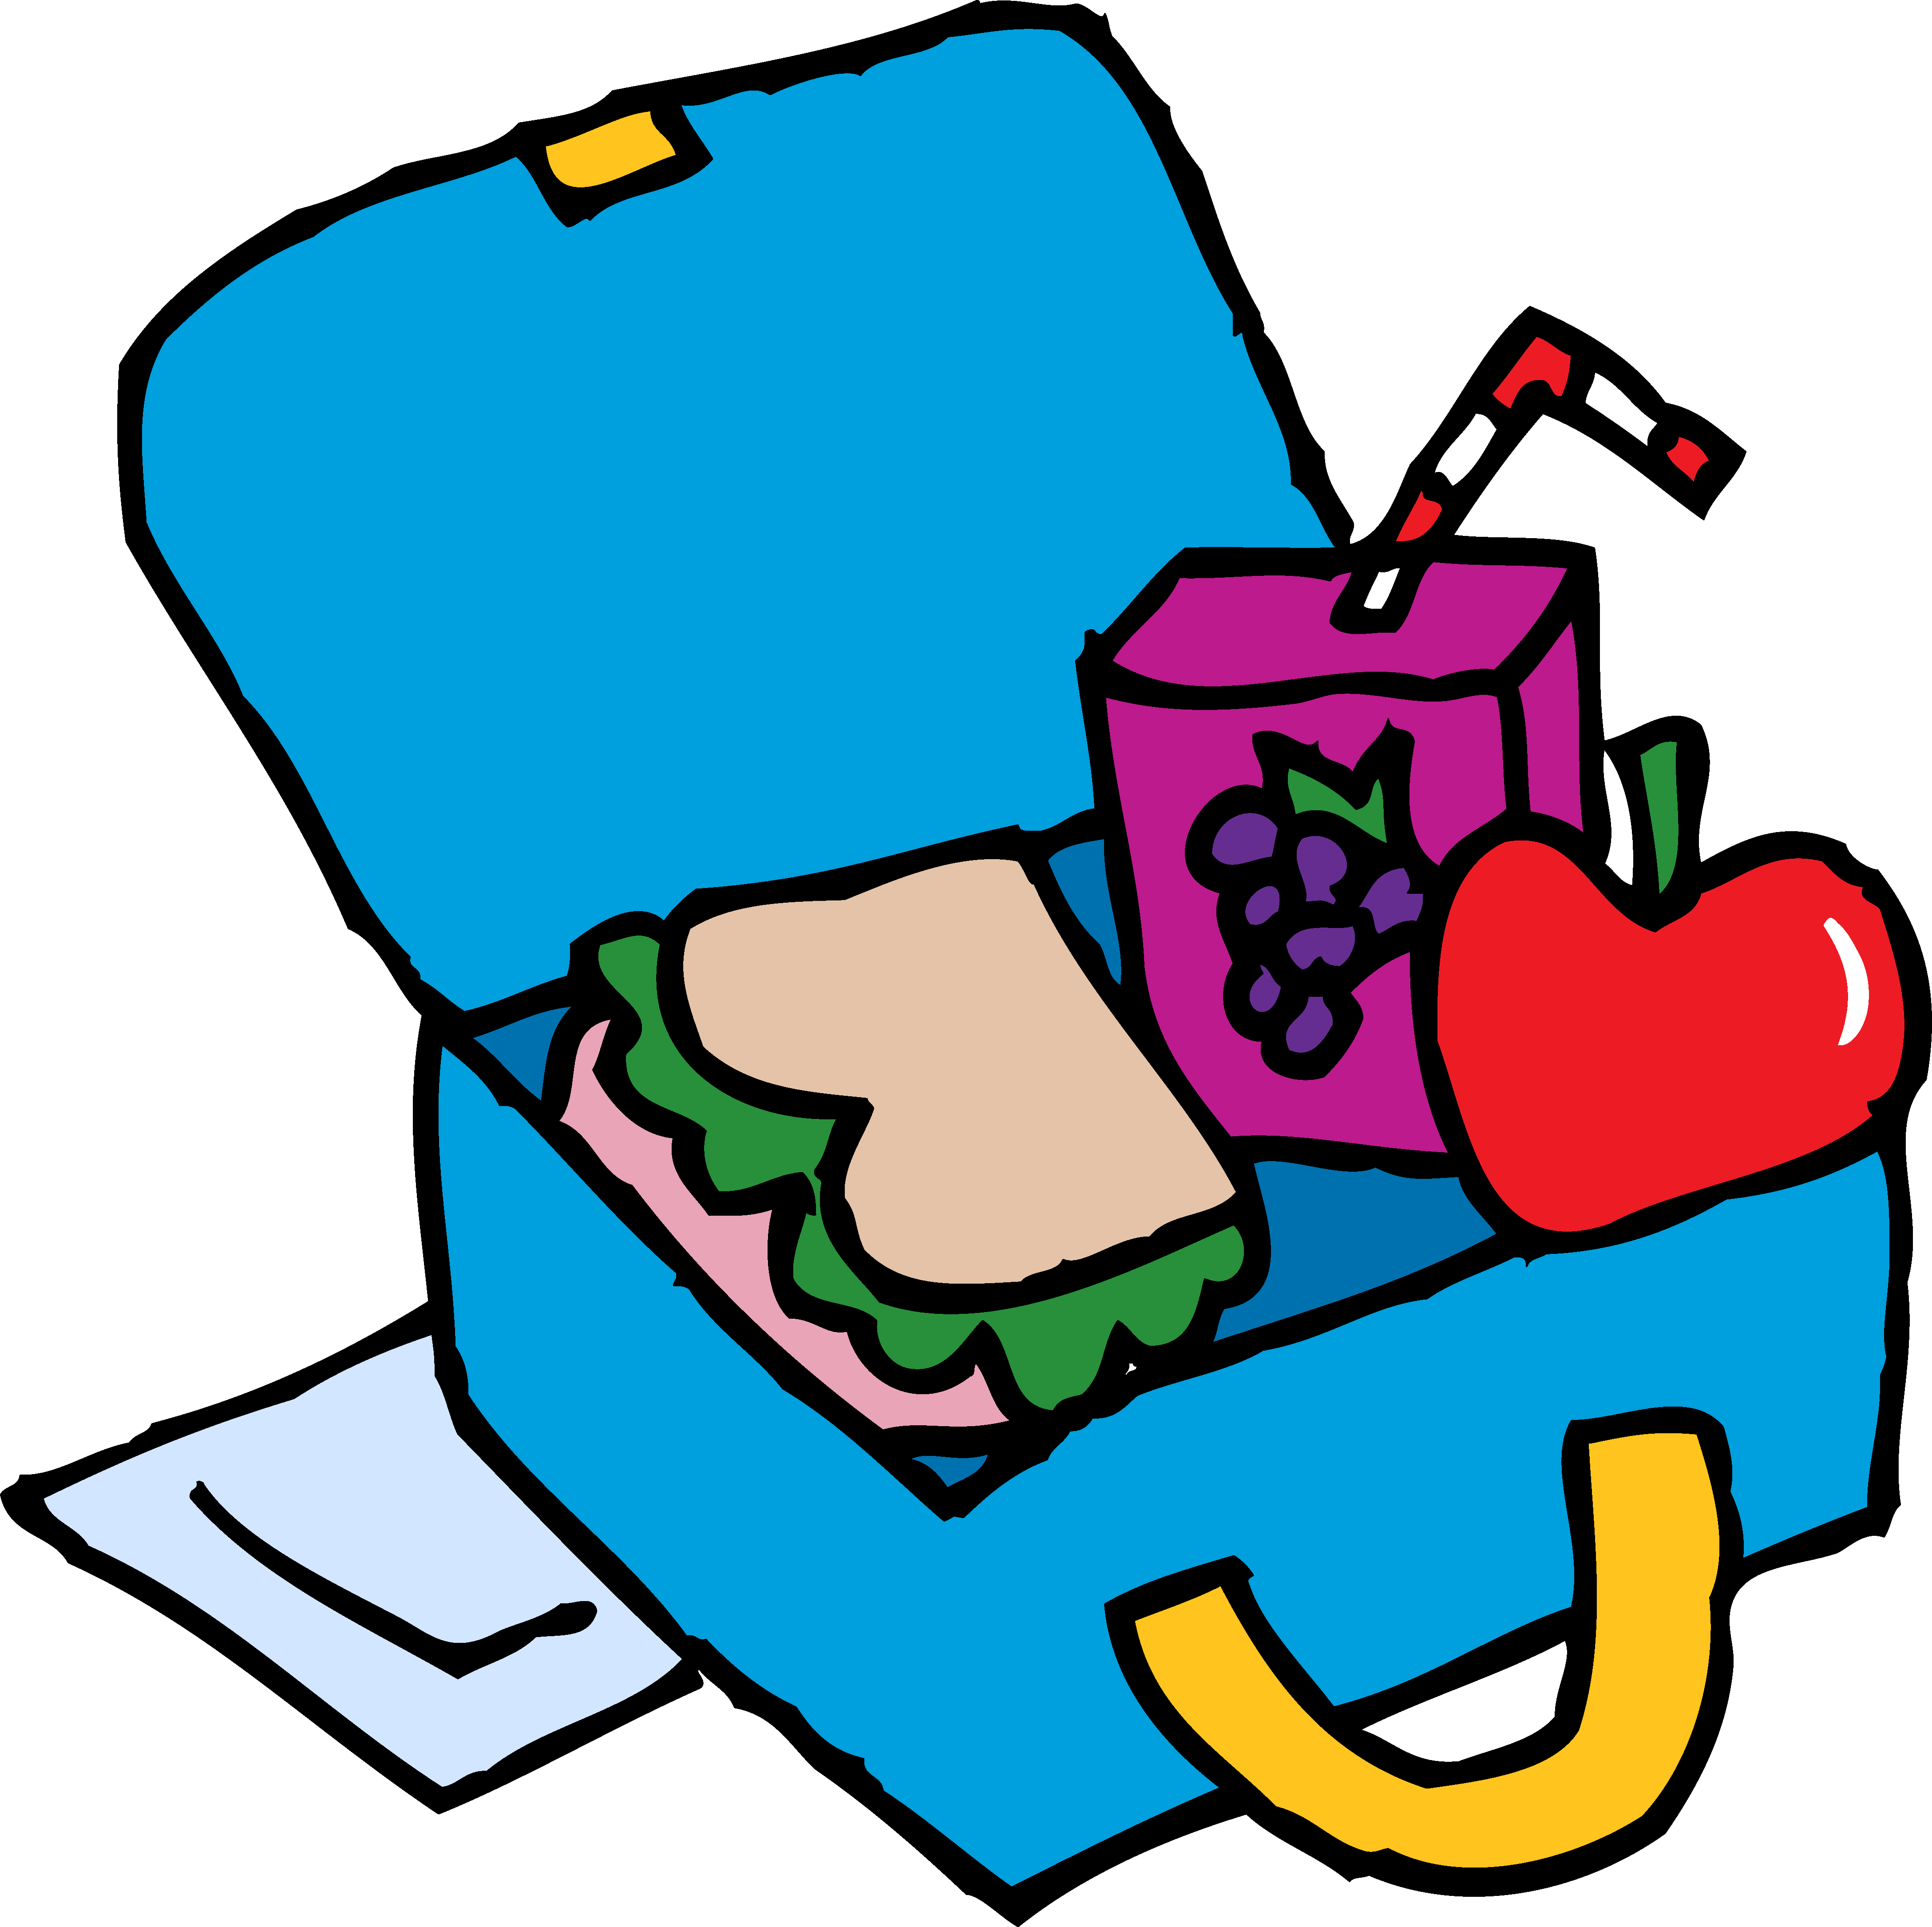 School Lunch Clipart - Free Clipart Images